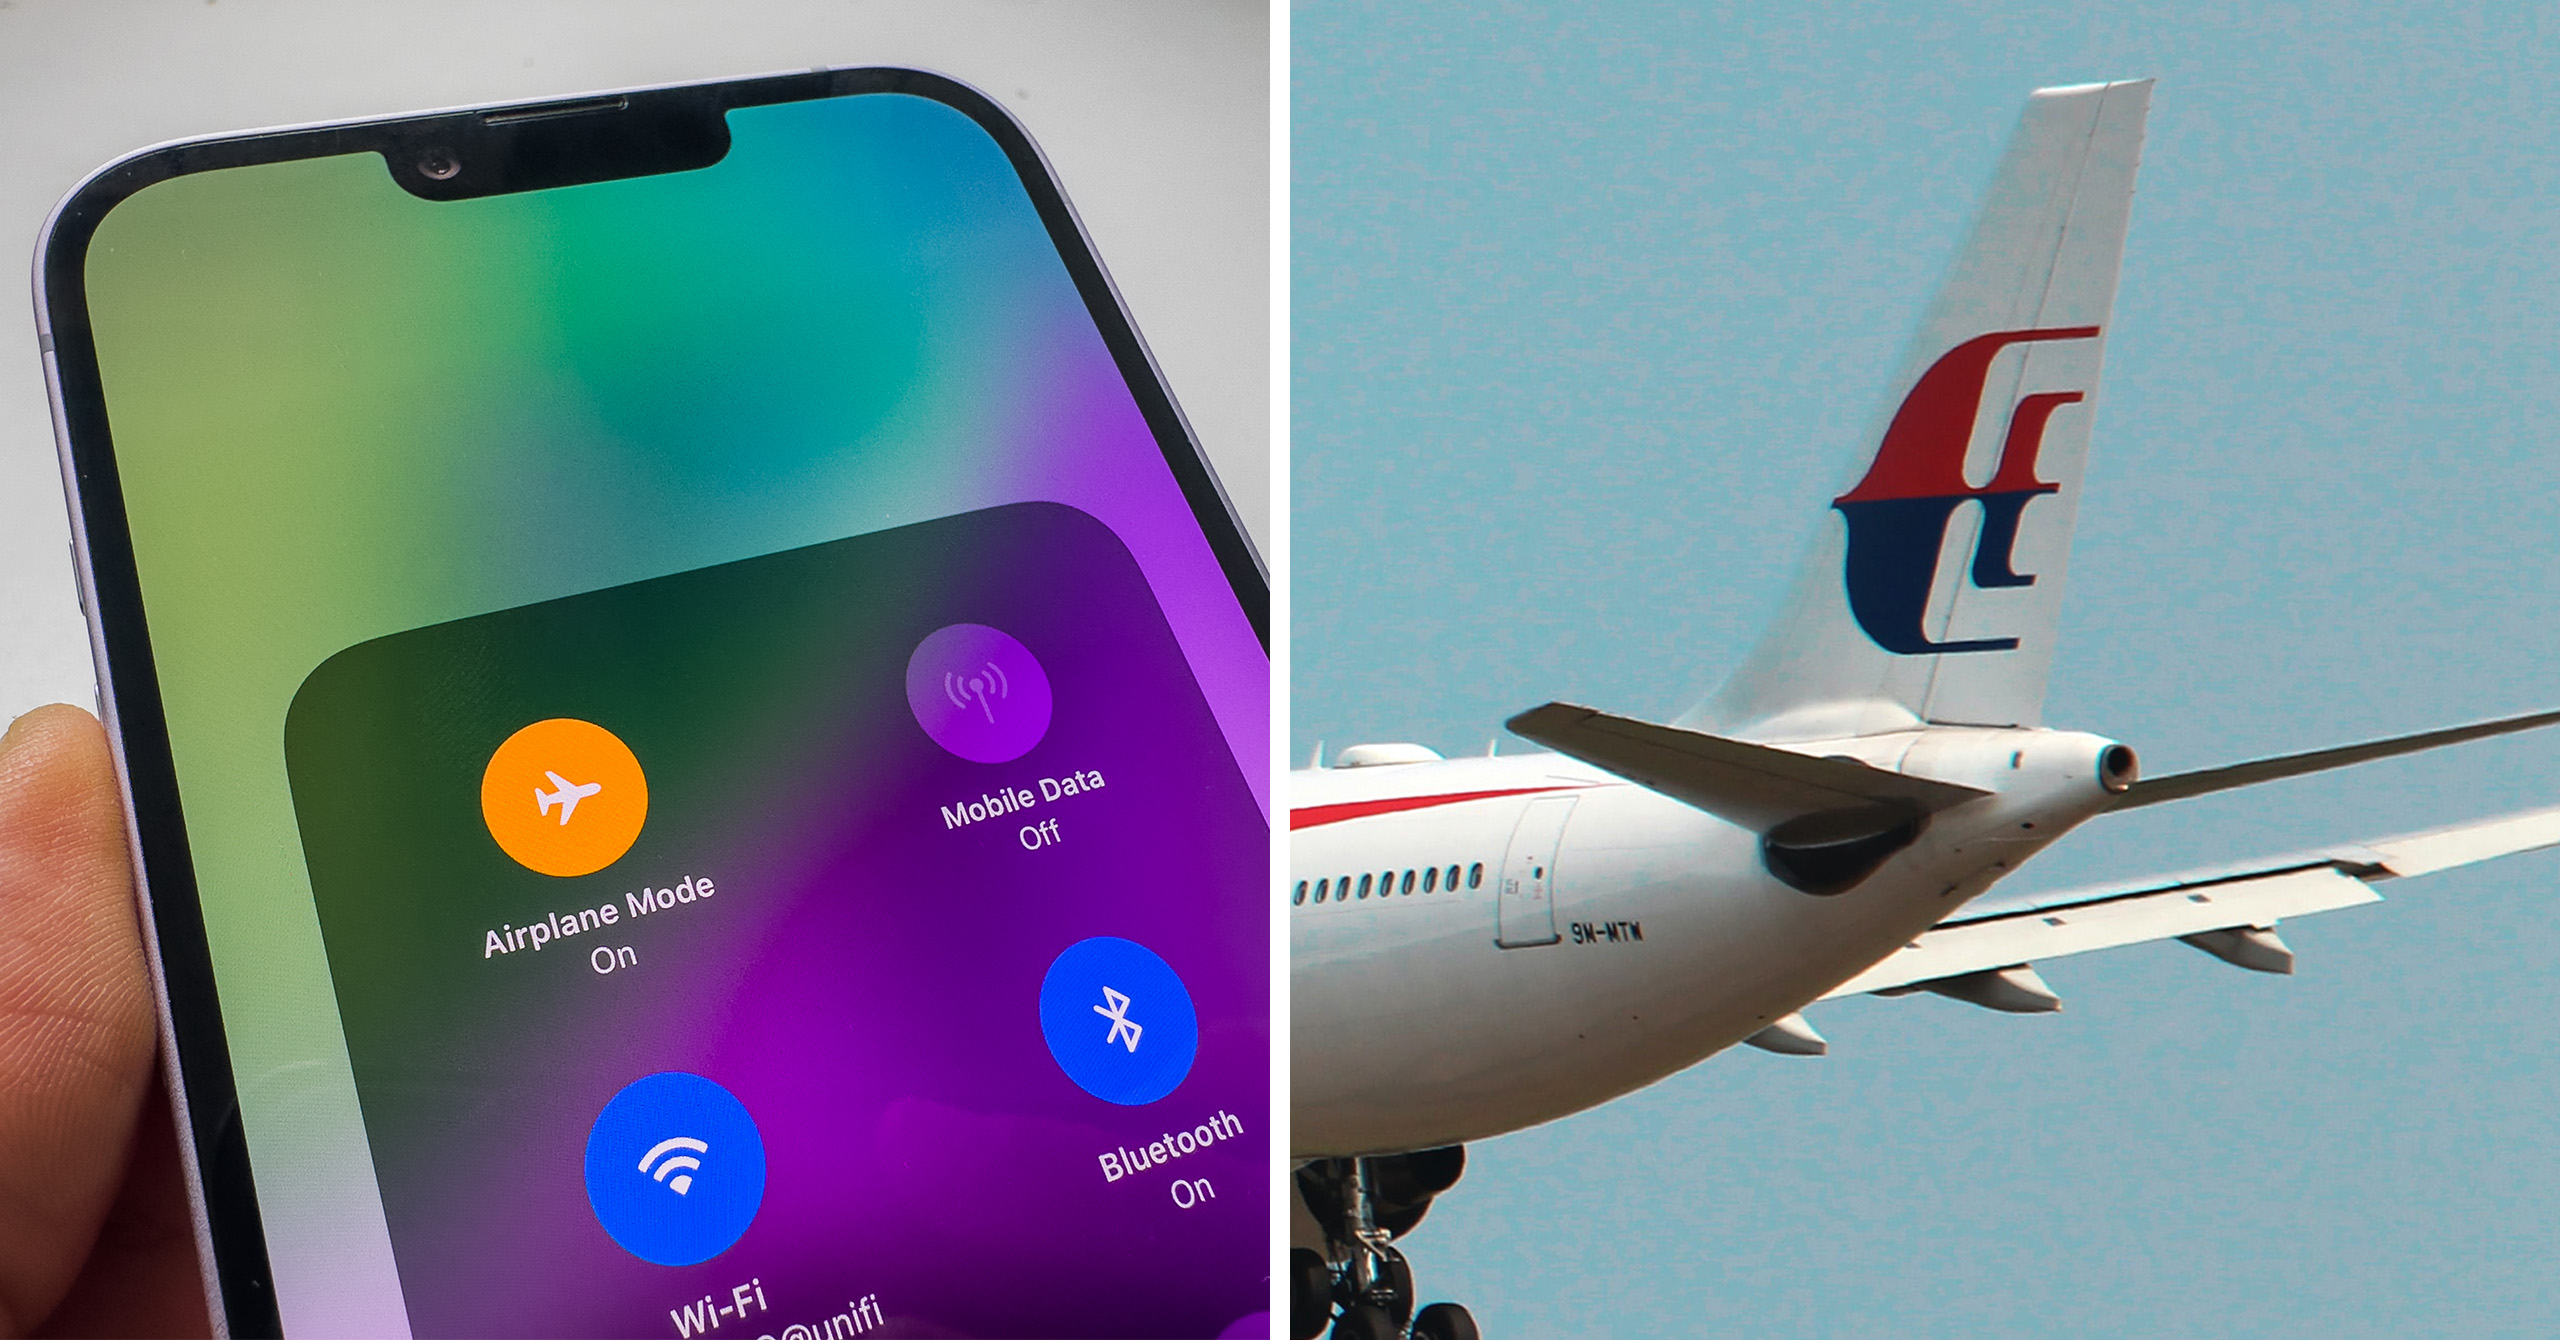 Say goodbye to Airplane Mode in the EU: Airlines set to introduce 5G on  flights - SoyaCincau